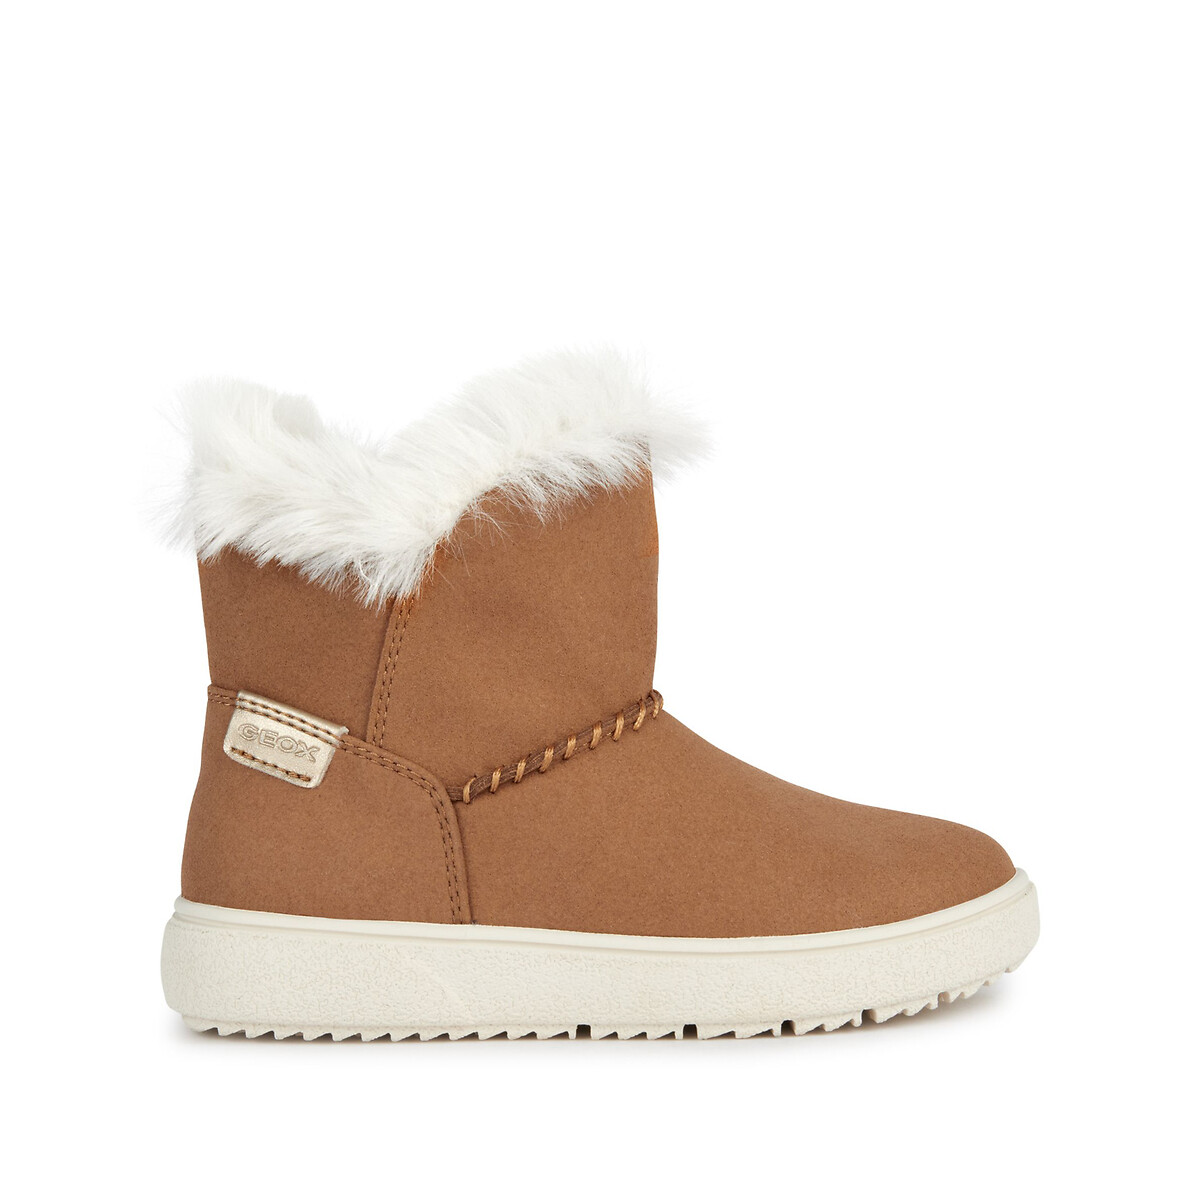 Image of Kids Theleven Calf Boots with Faux Fur Lining